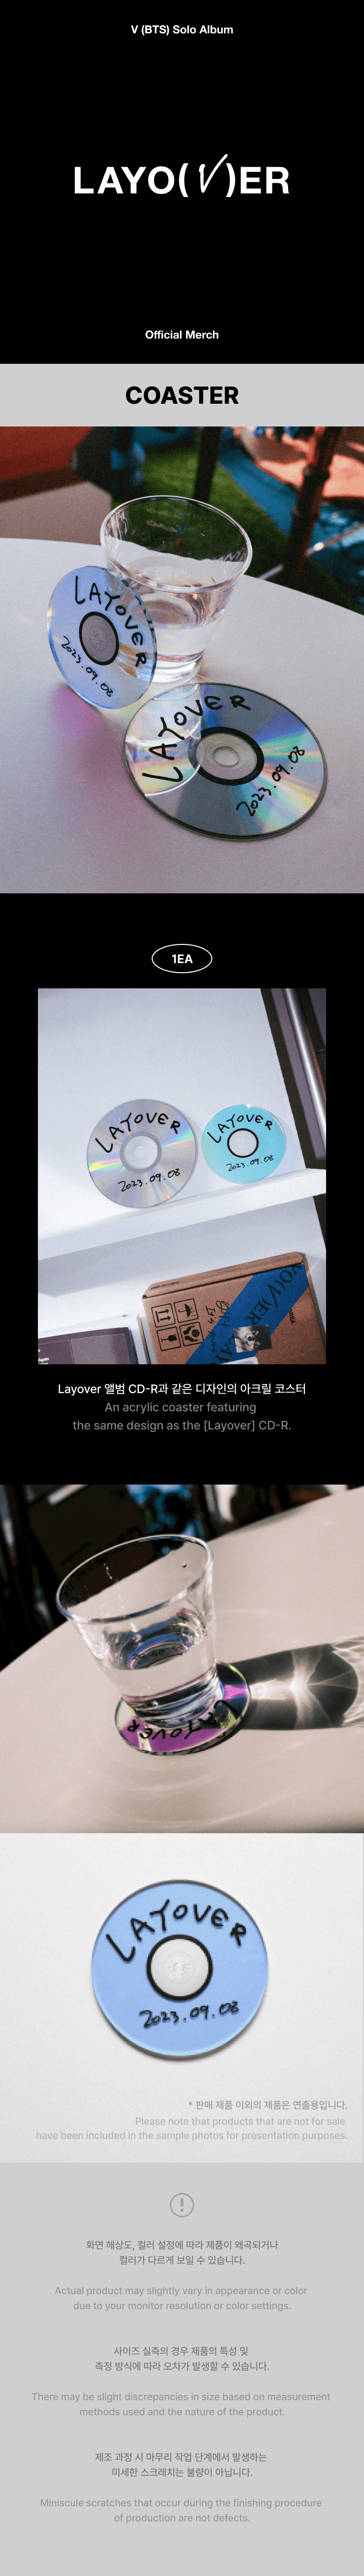 BTS V - LAYOVER 1ST SOLO ALBUM OFFICIAL MD